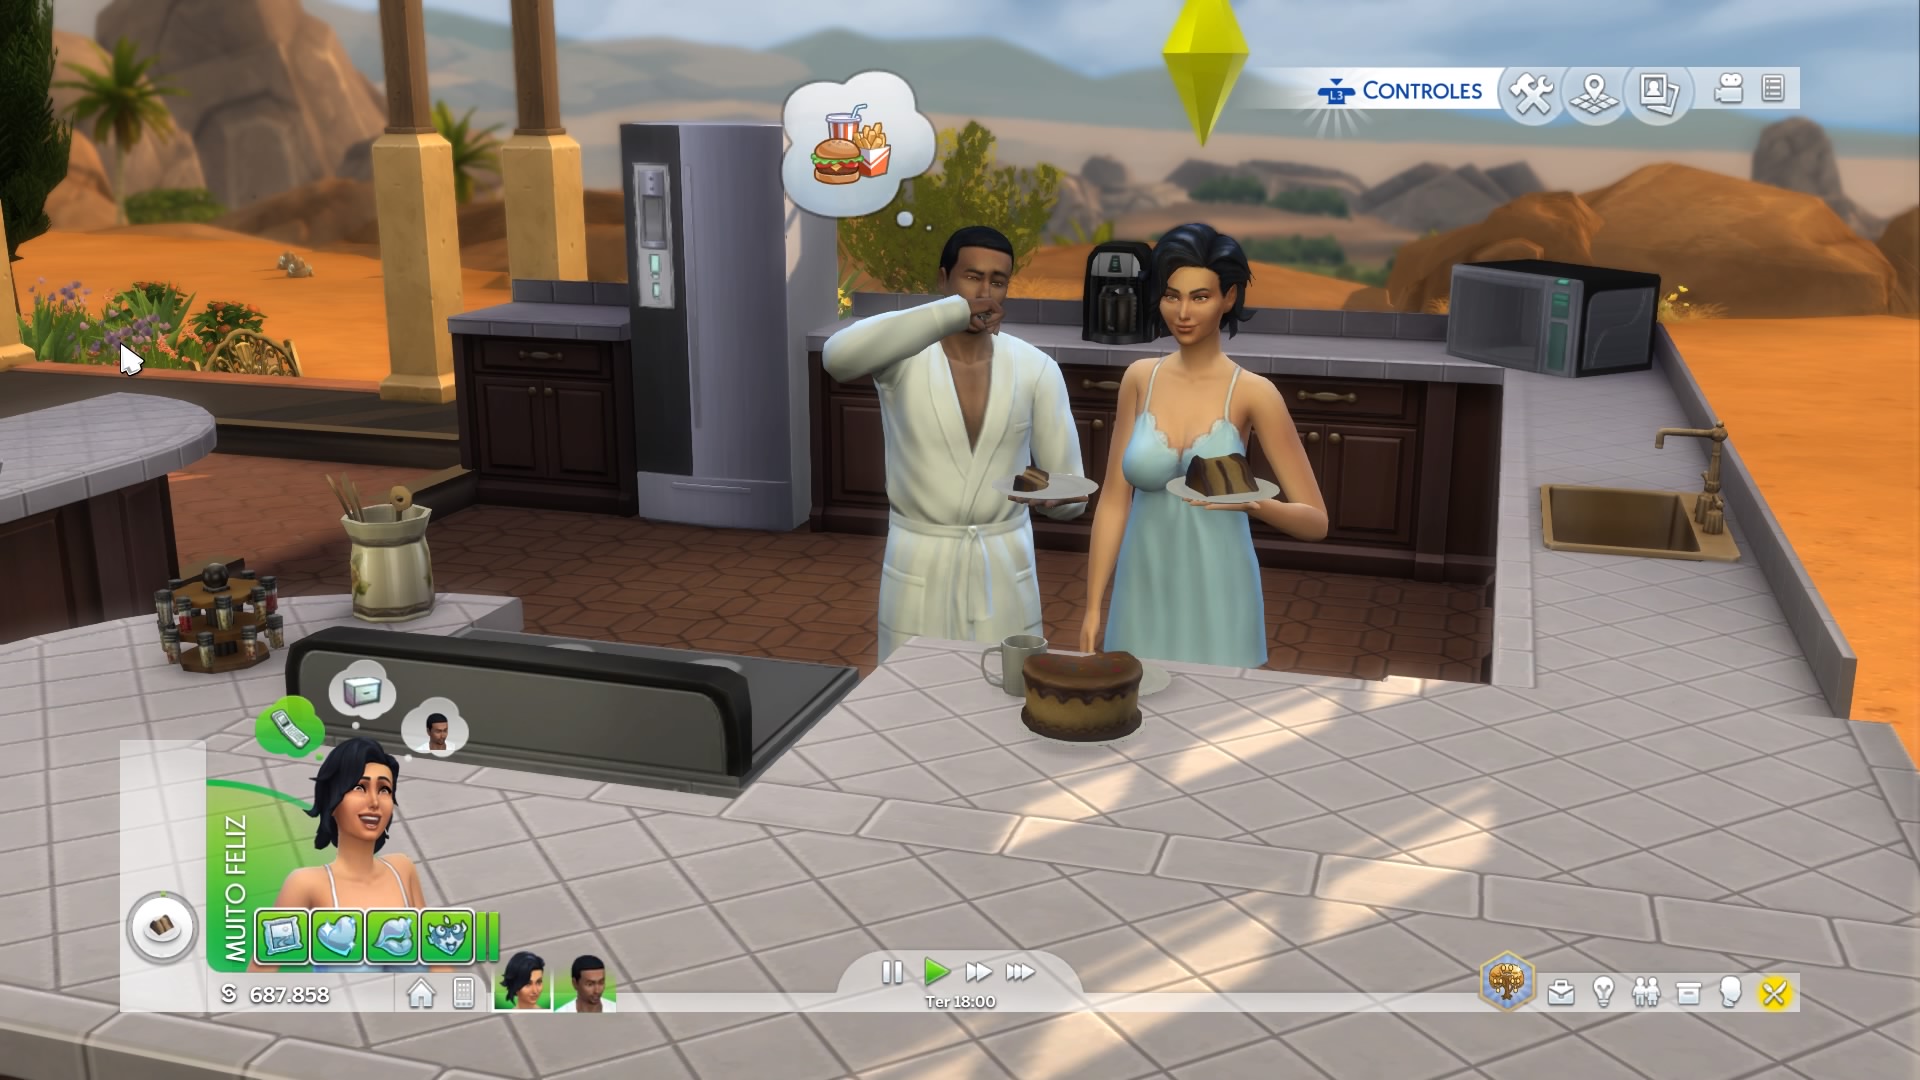 The Sims 4: Vale a Pena?